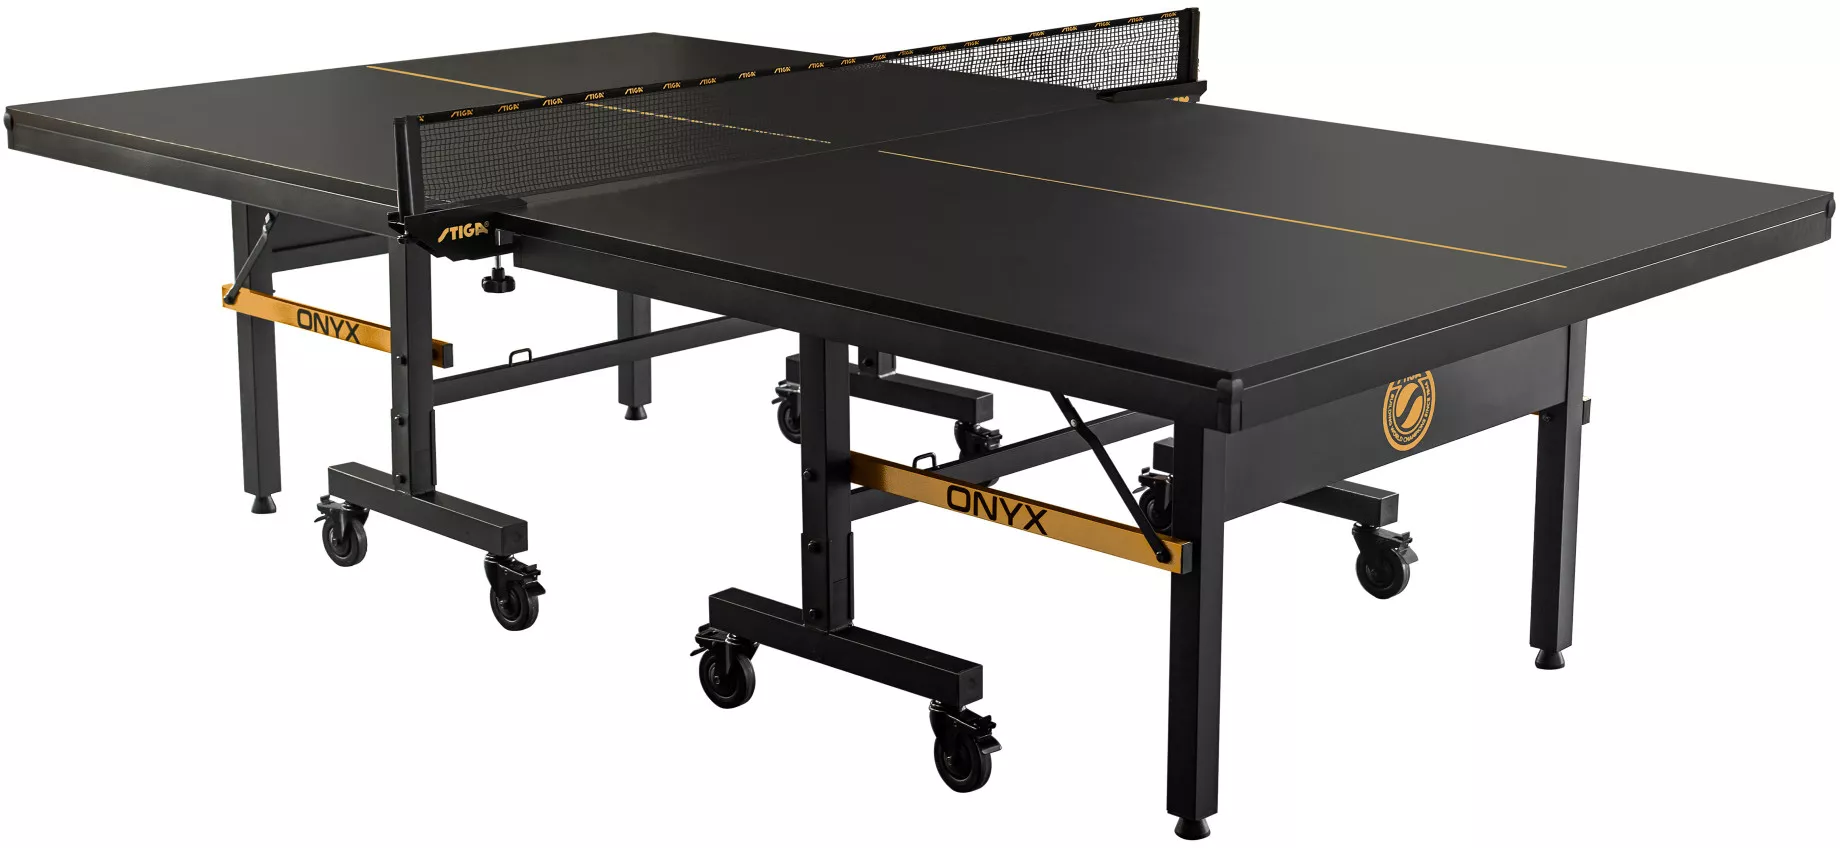 Choosing Your Ideal Table Tennis Table